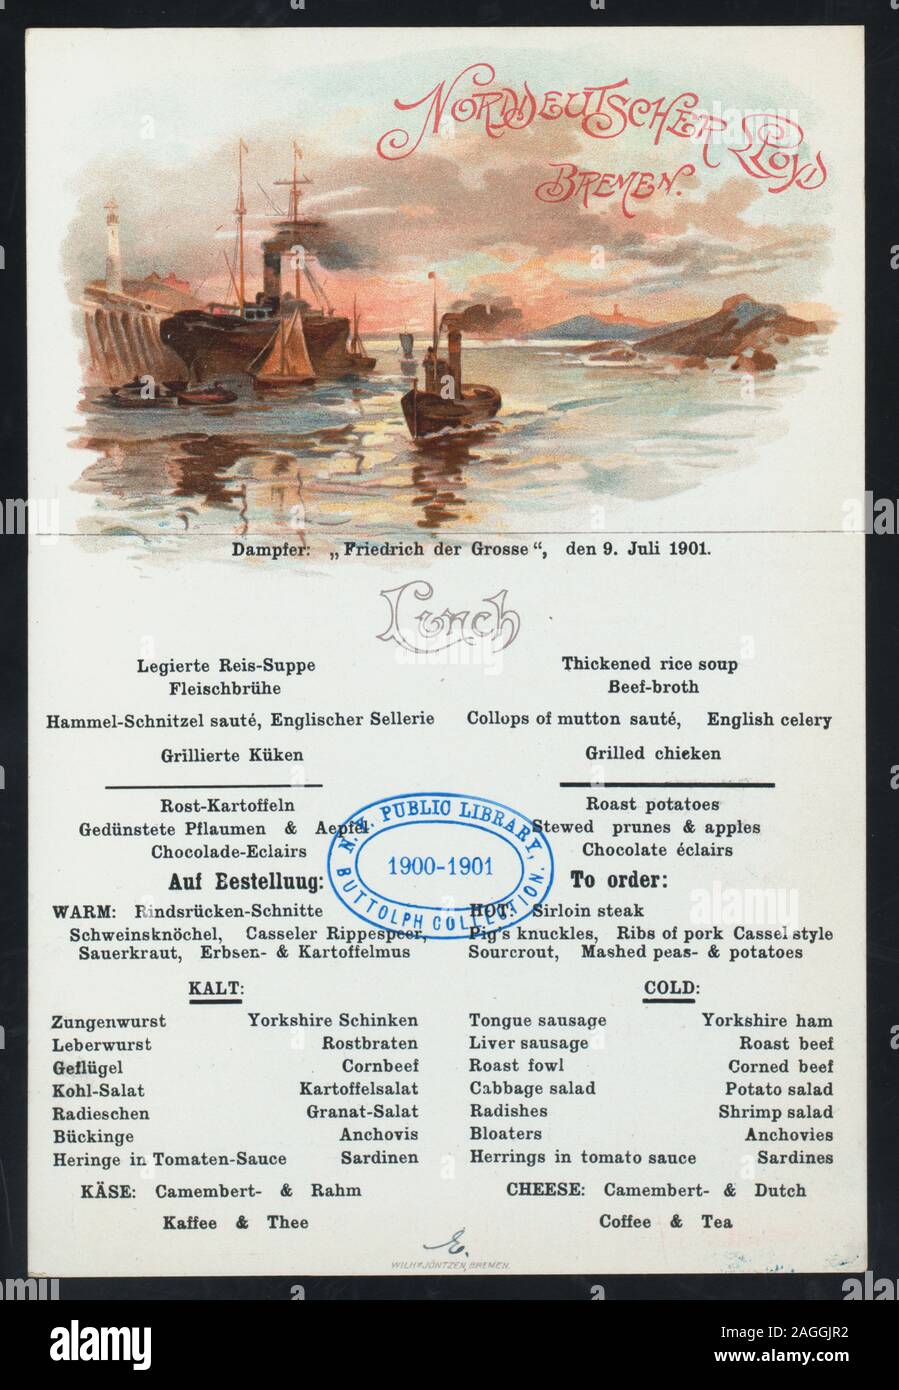 SHIPS IN HARBOR; MENUS SEPARATE IN GERMAN AND ENGLISH; MAY BE USED AS POSTCARD Citation/Reference: 1901-1914; LUNCH [held by] NORDDEUTSCHER LLOYD BREMEN [at] SS FRIEDRICH DER GROSSE (SS;) Stock Photo